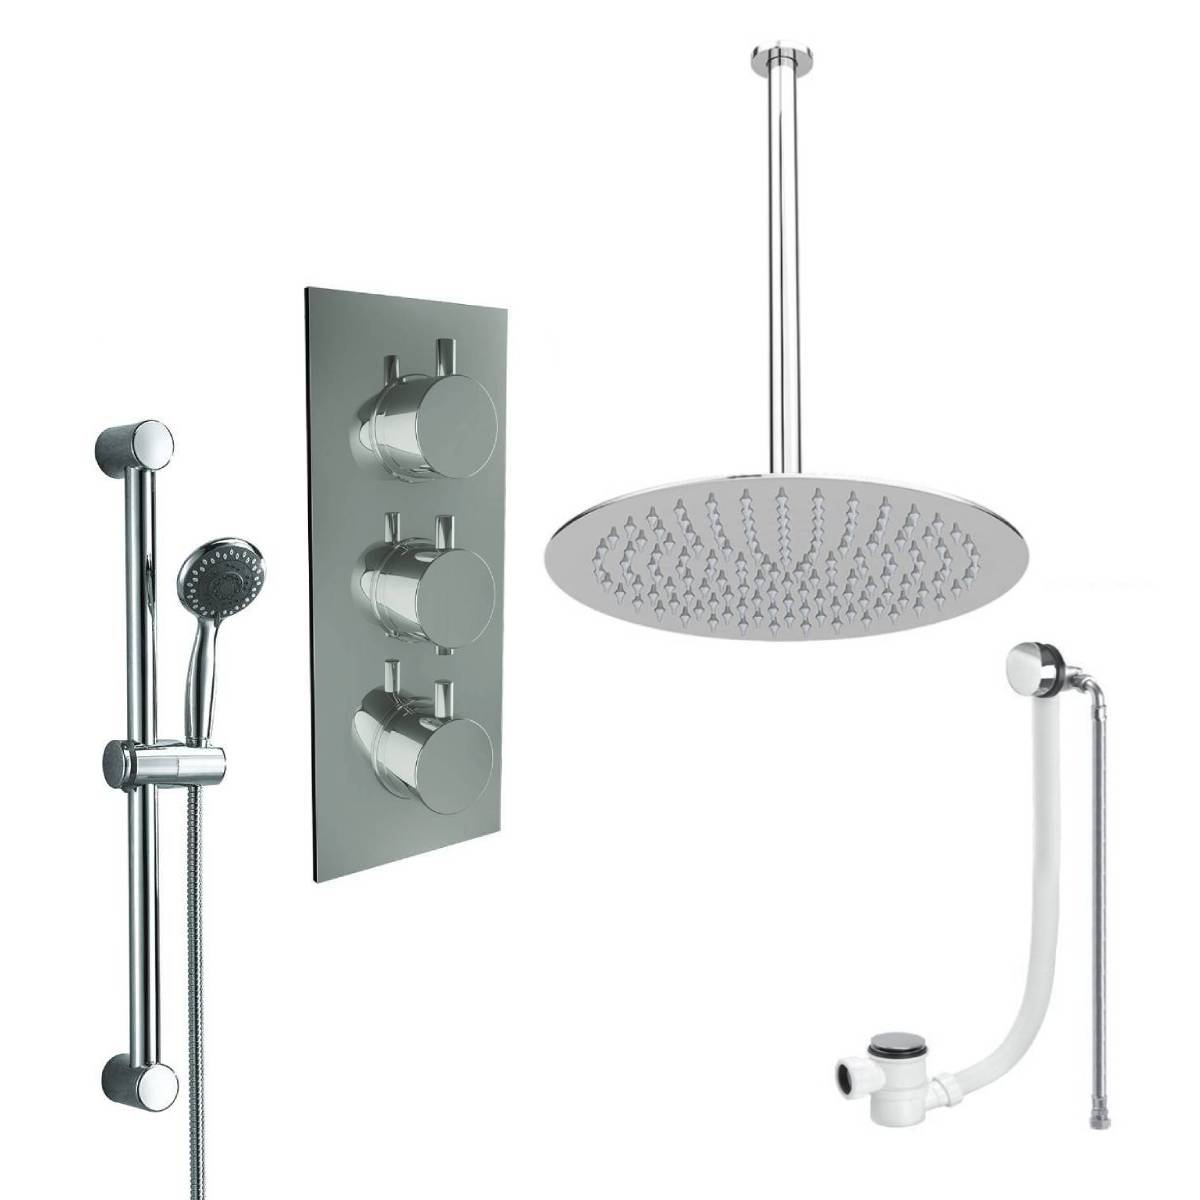 Round Triple Thermostatic Concealed Mixer Shower Kit with Ceiling Mounted 300mm Shower Head, Slide Rail Kit & Overflow Filler (12490)